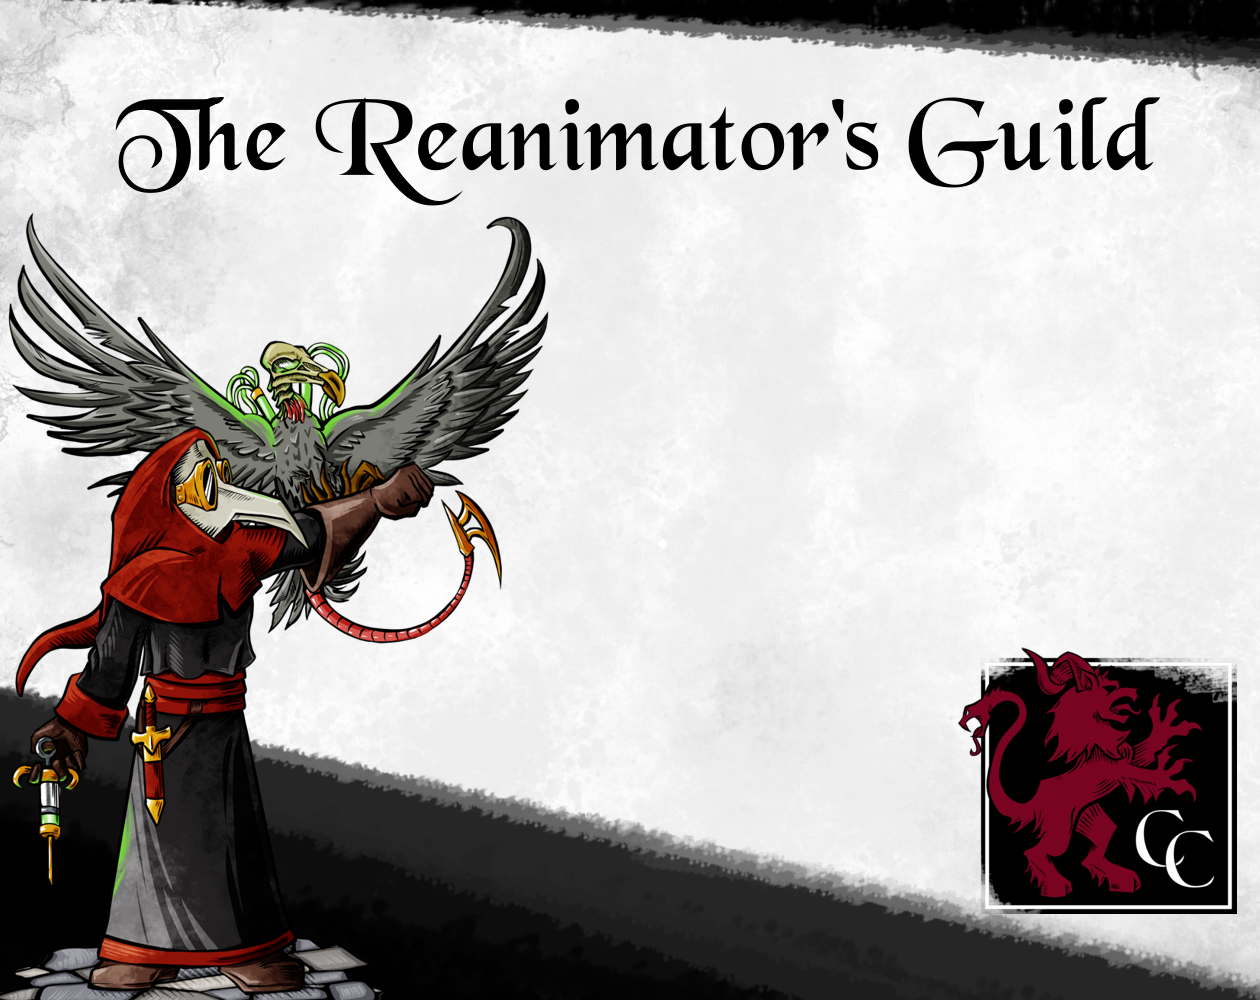 The Reanimator's Guild: A Paper Miniature Collection